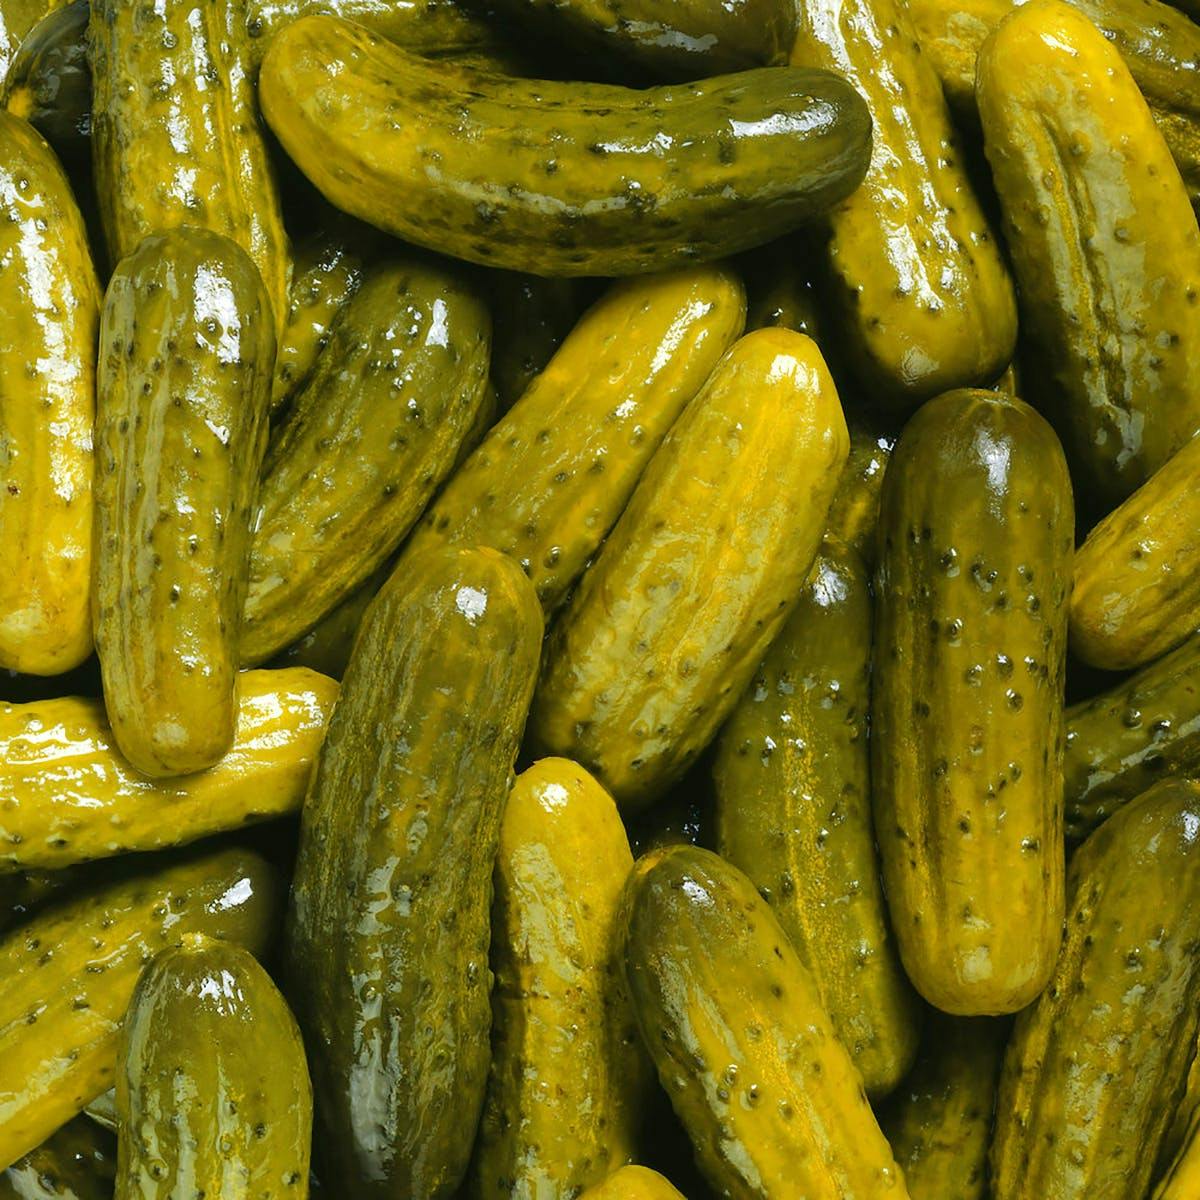 ny-sour-pickles-1-gallon.ffc0f44a0be85000ee4399f282cd751c.jpg